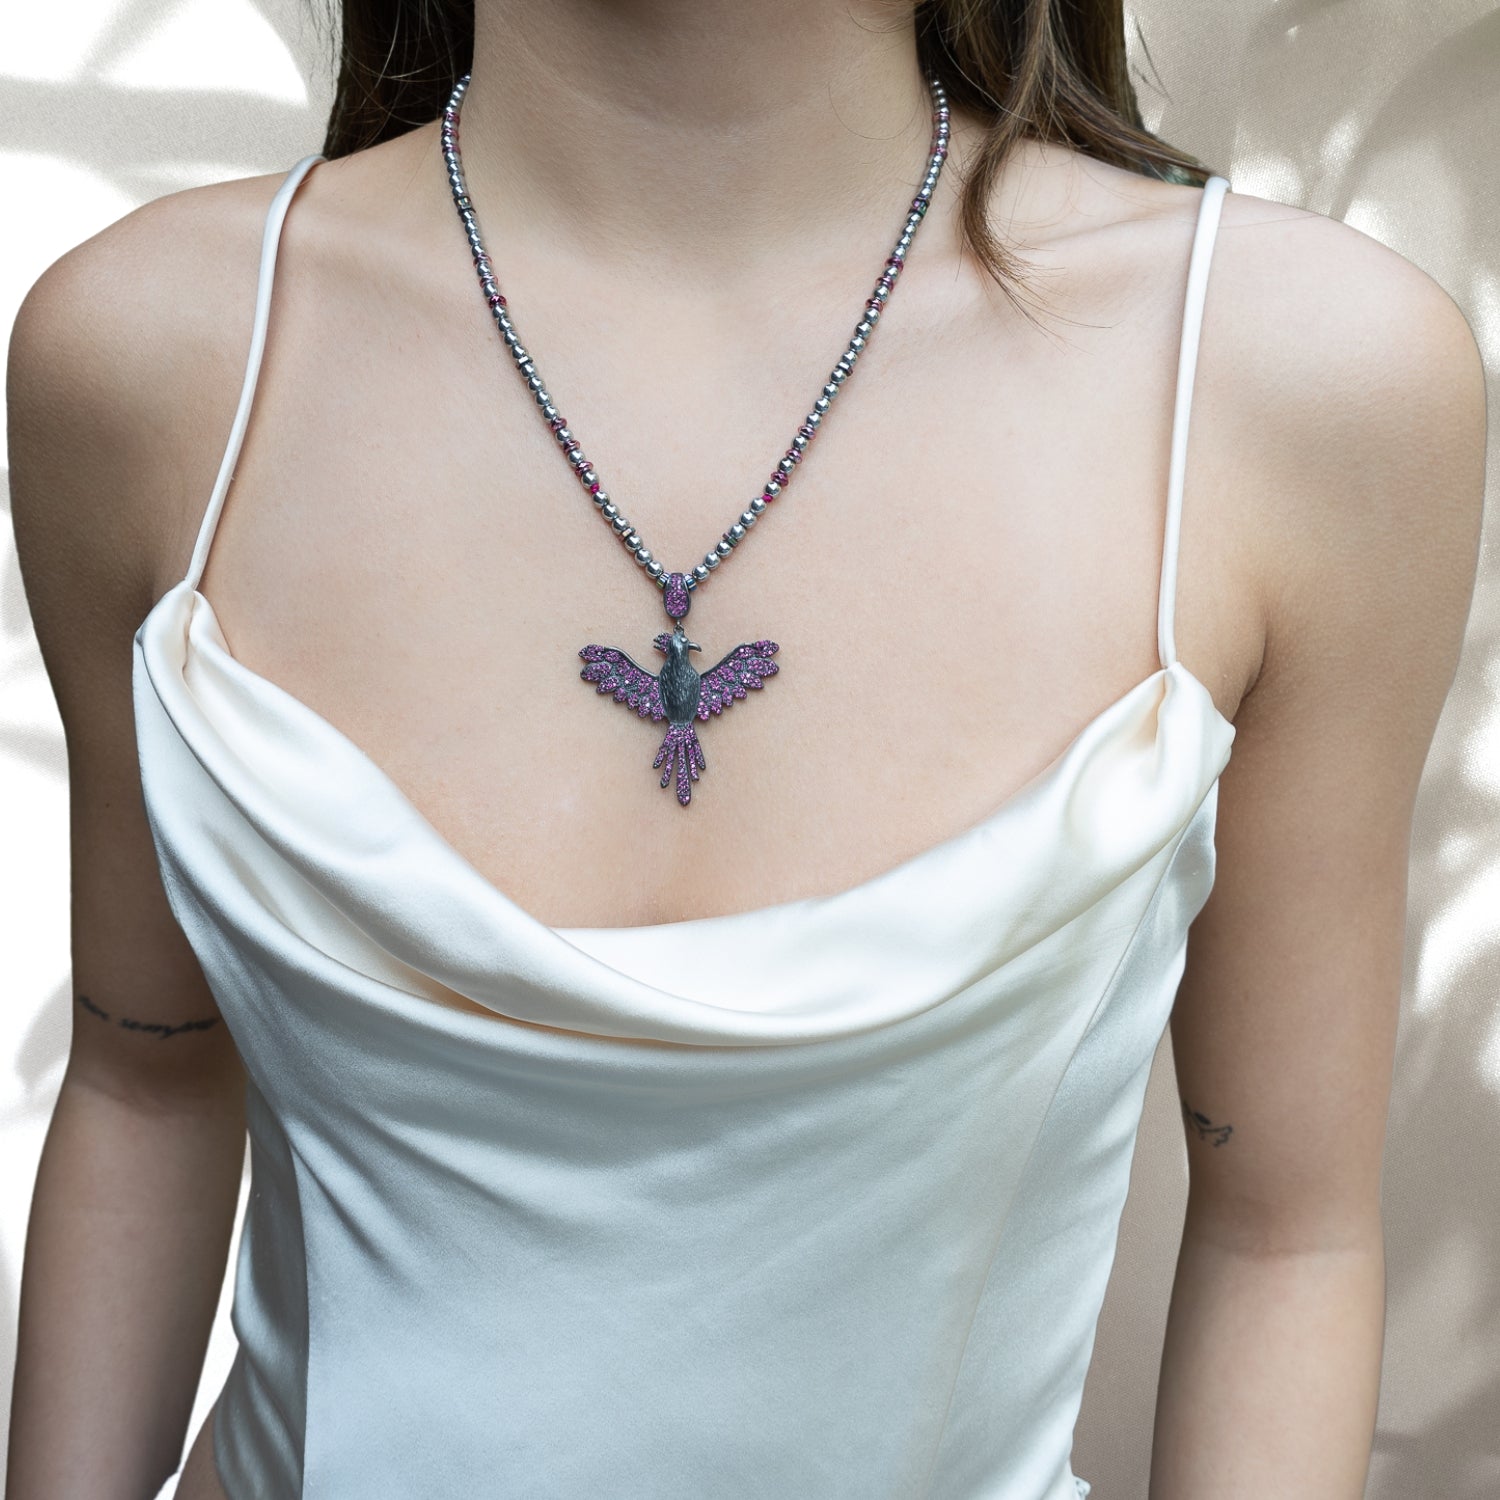 The Inner Rebirth Phoenix Necklace, worn by a model, radiating strength and rebirth.